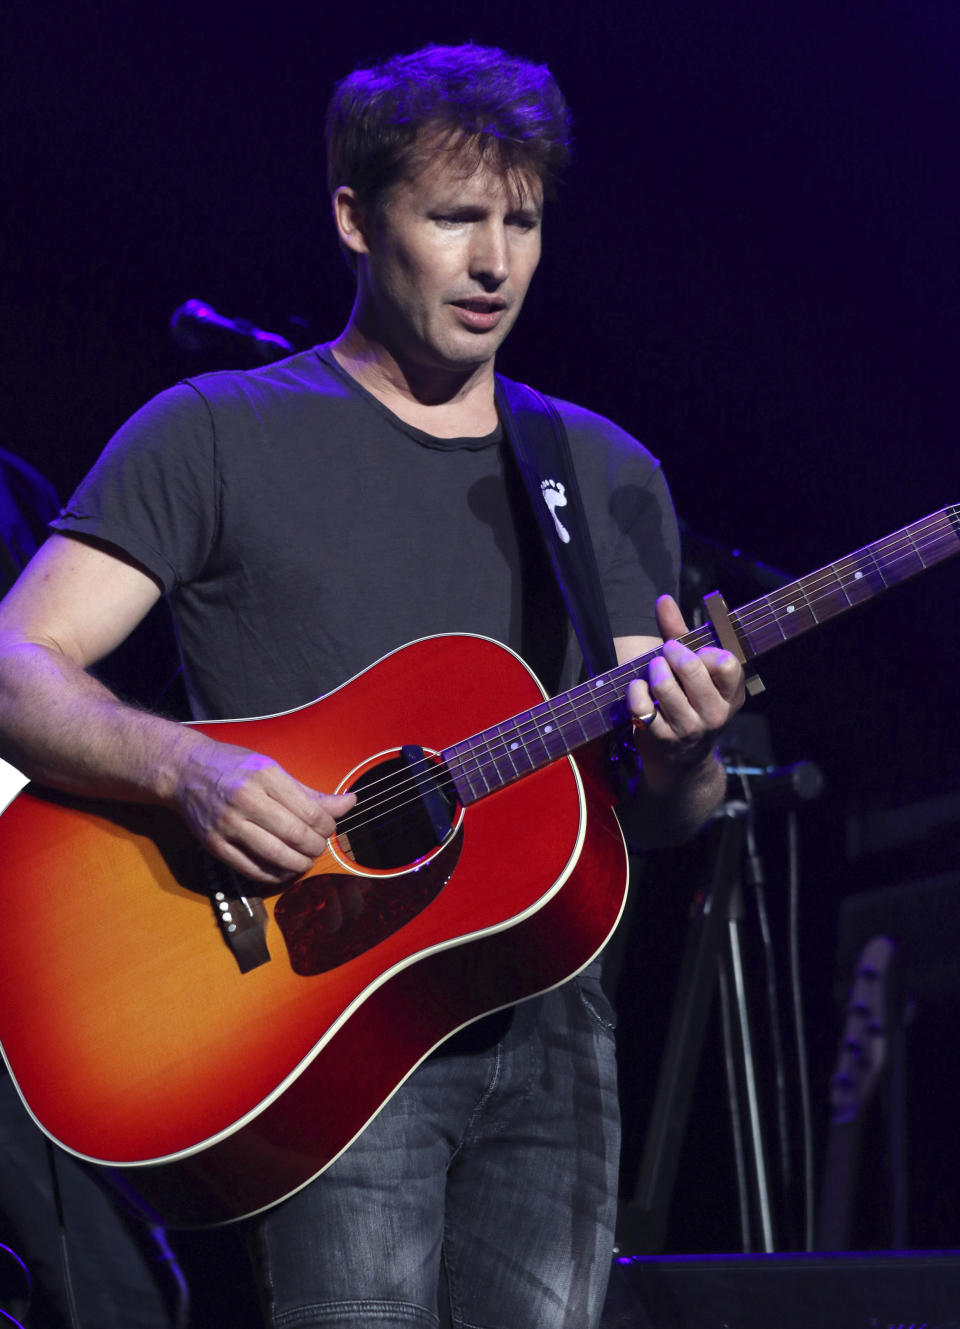 James Blunt performs as the opener for Ed Sheeran at Infinite Energy Center on Friday, August 25, 2017, in Atlanta. (Photo by Robb Cohen/Invision/AP)